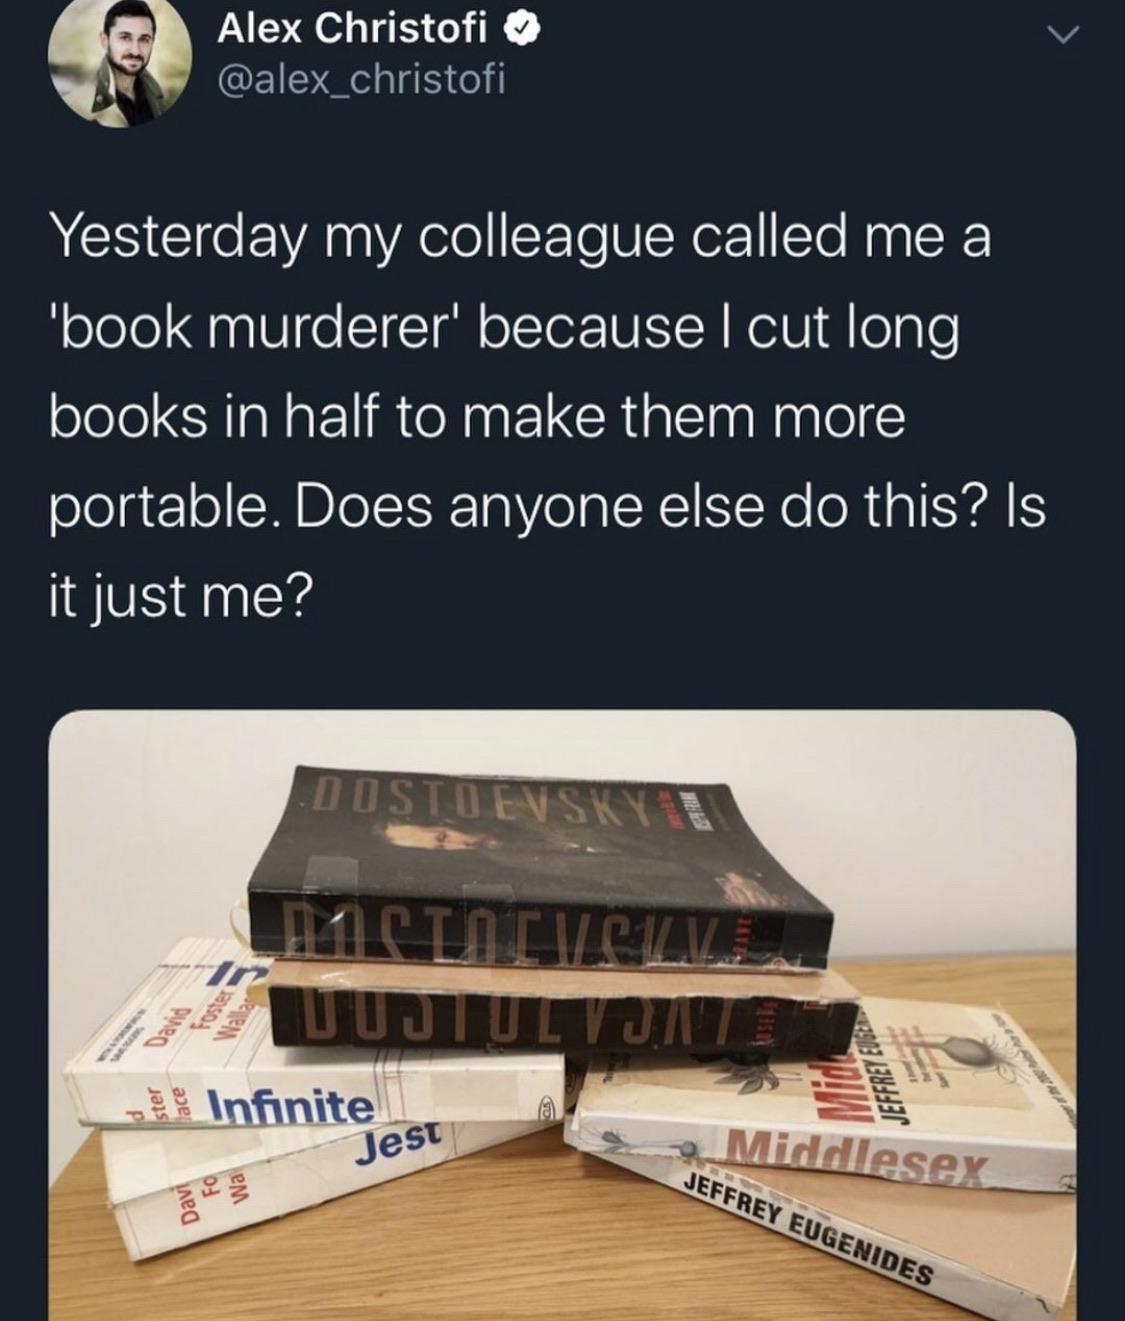 material - Alex Christofi Yesterday my colleague called me a "book murderer' because I cut long books in half to make them more portable. Does anyone else do this? Is it just me? Tistievski 11 Clicv Elz Jeffrey Euge ster Infinite Jest Middlesex Fo Davi wa